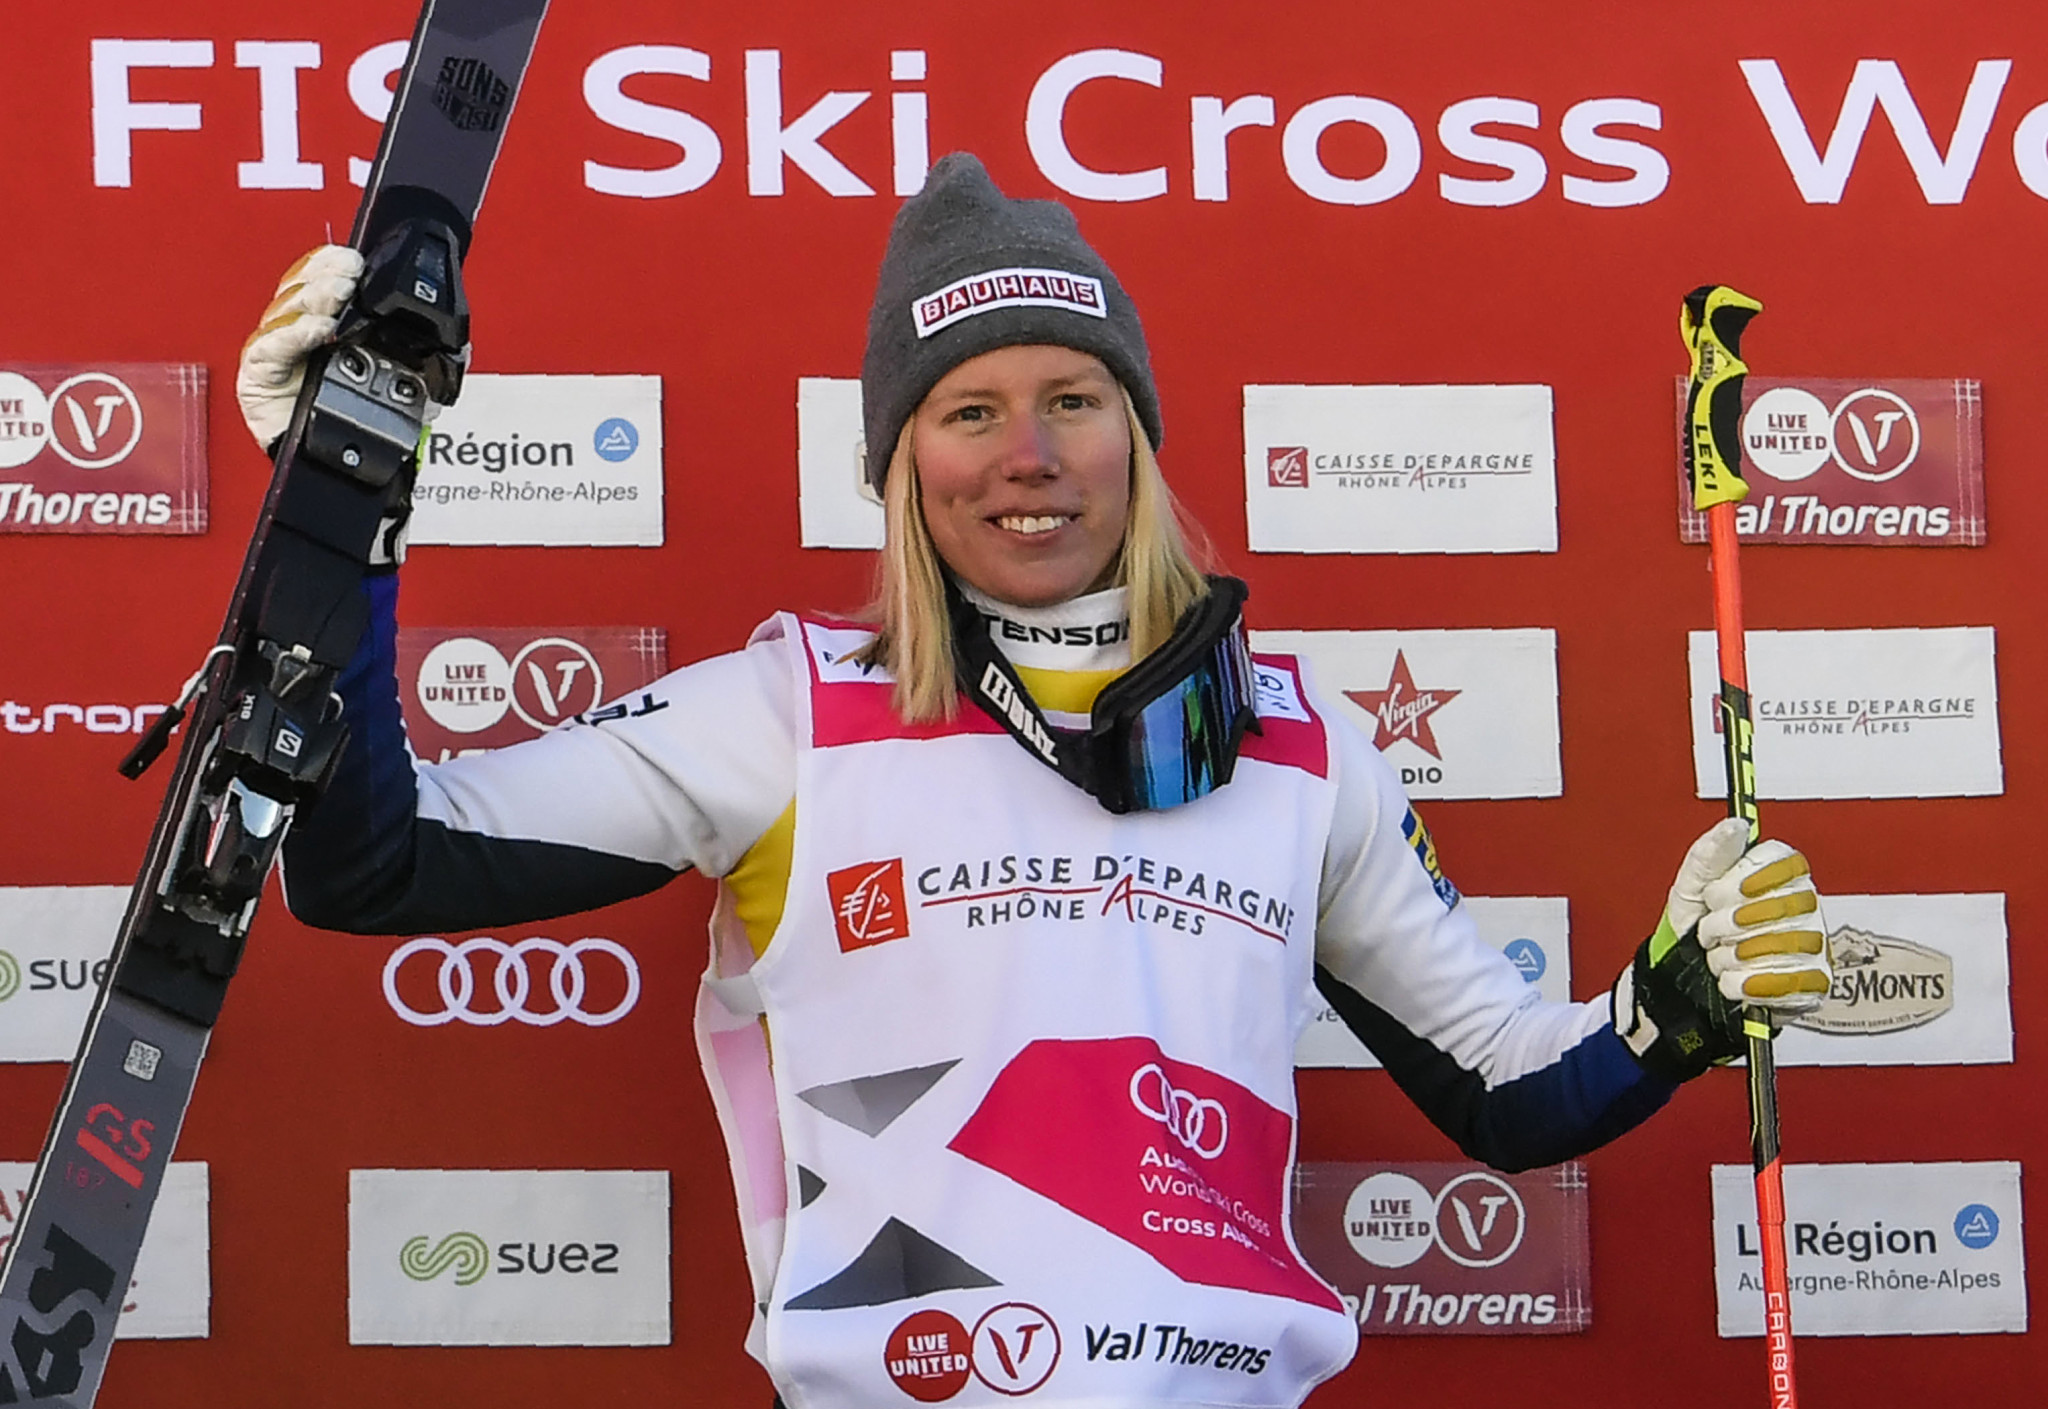 Näslund and Drury earn opening wins at FIS Ski Cross World Cup in Val Thorens